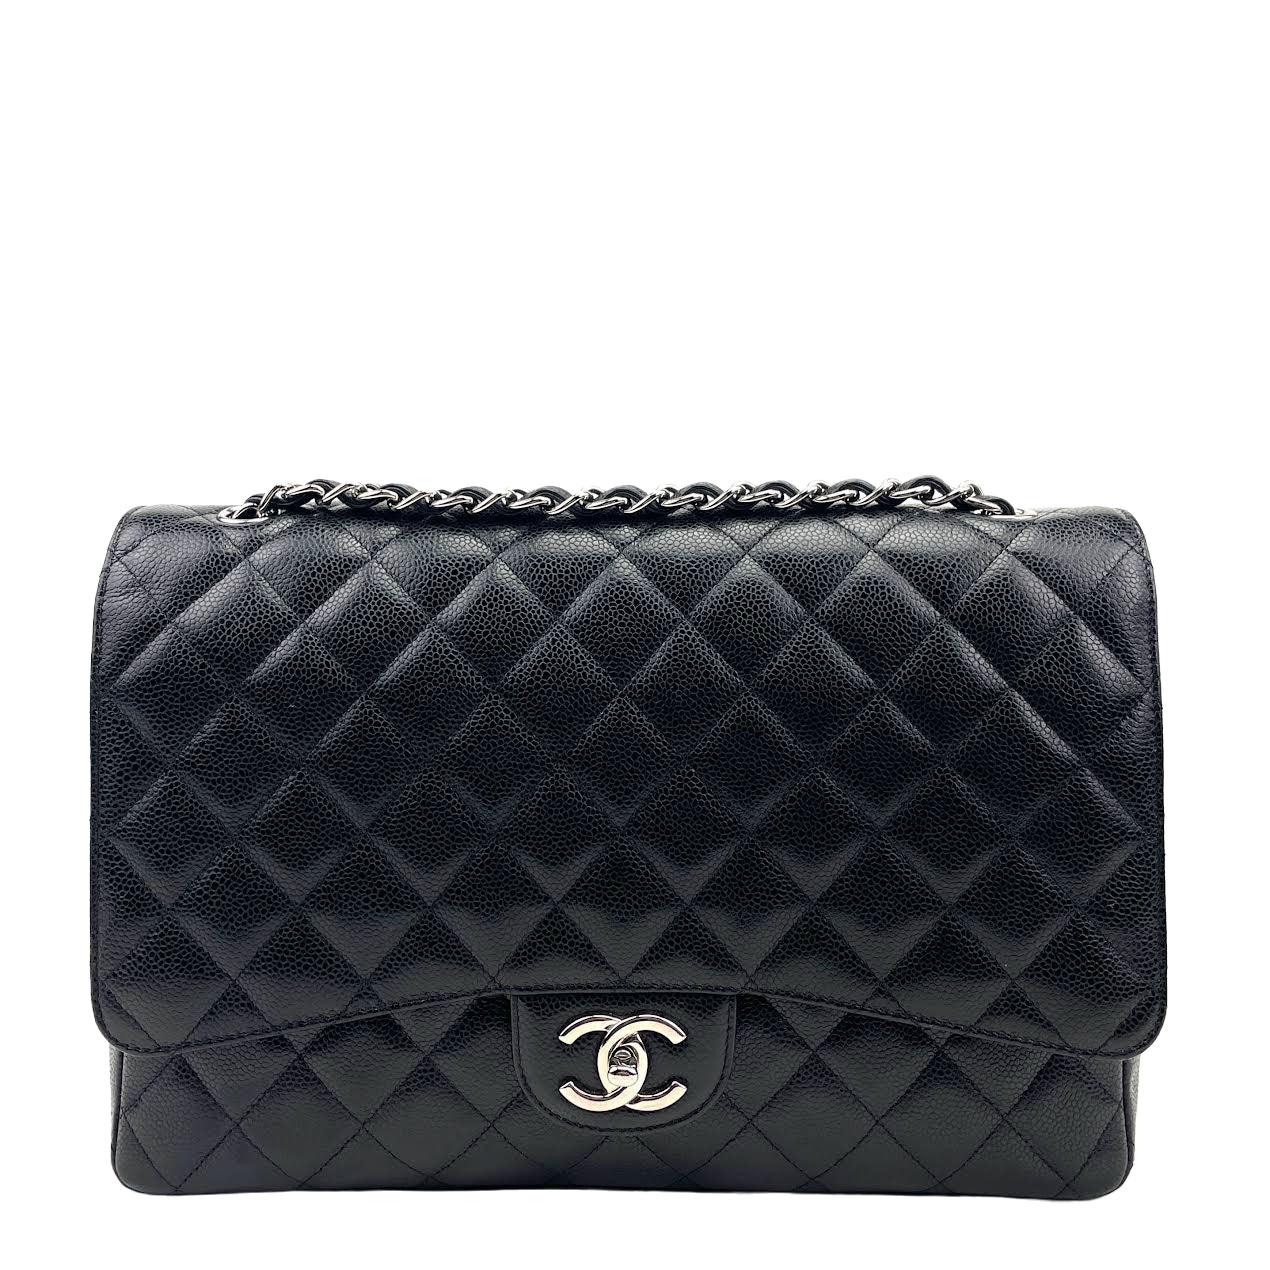 Chanel Black Maxi Caviar Quilted Double Flap